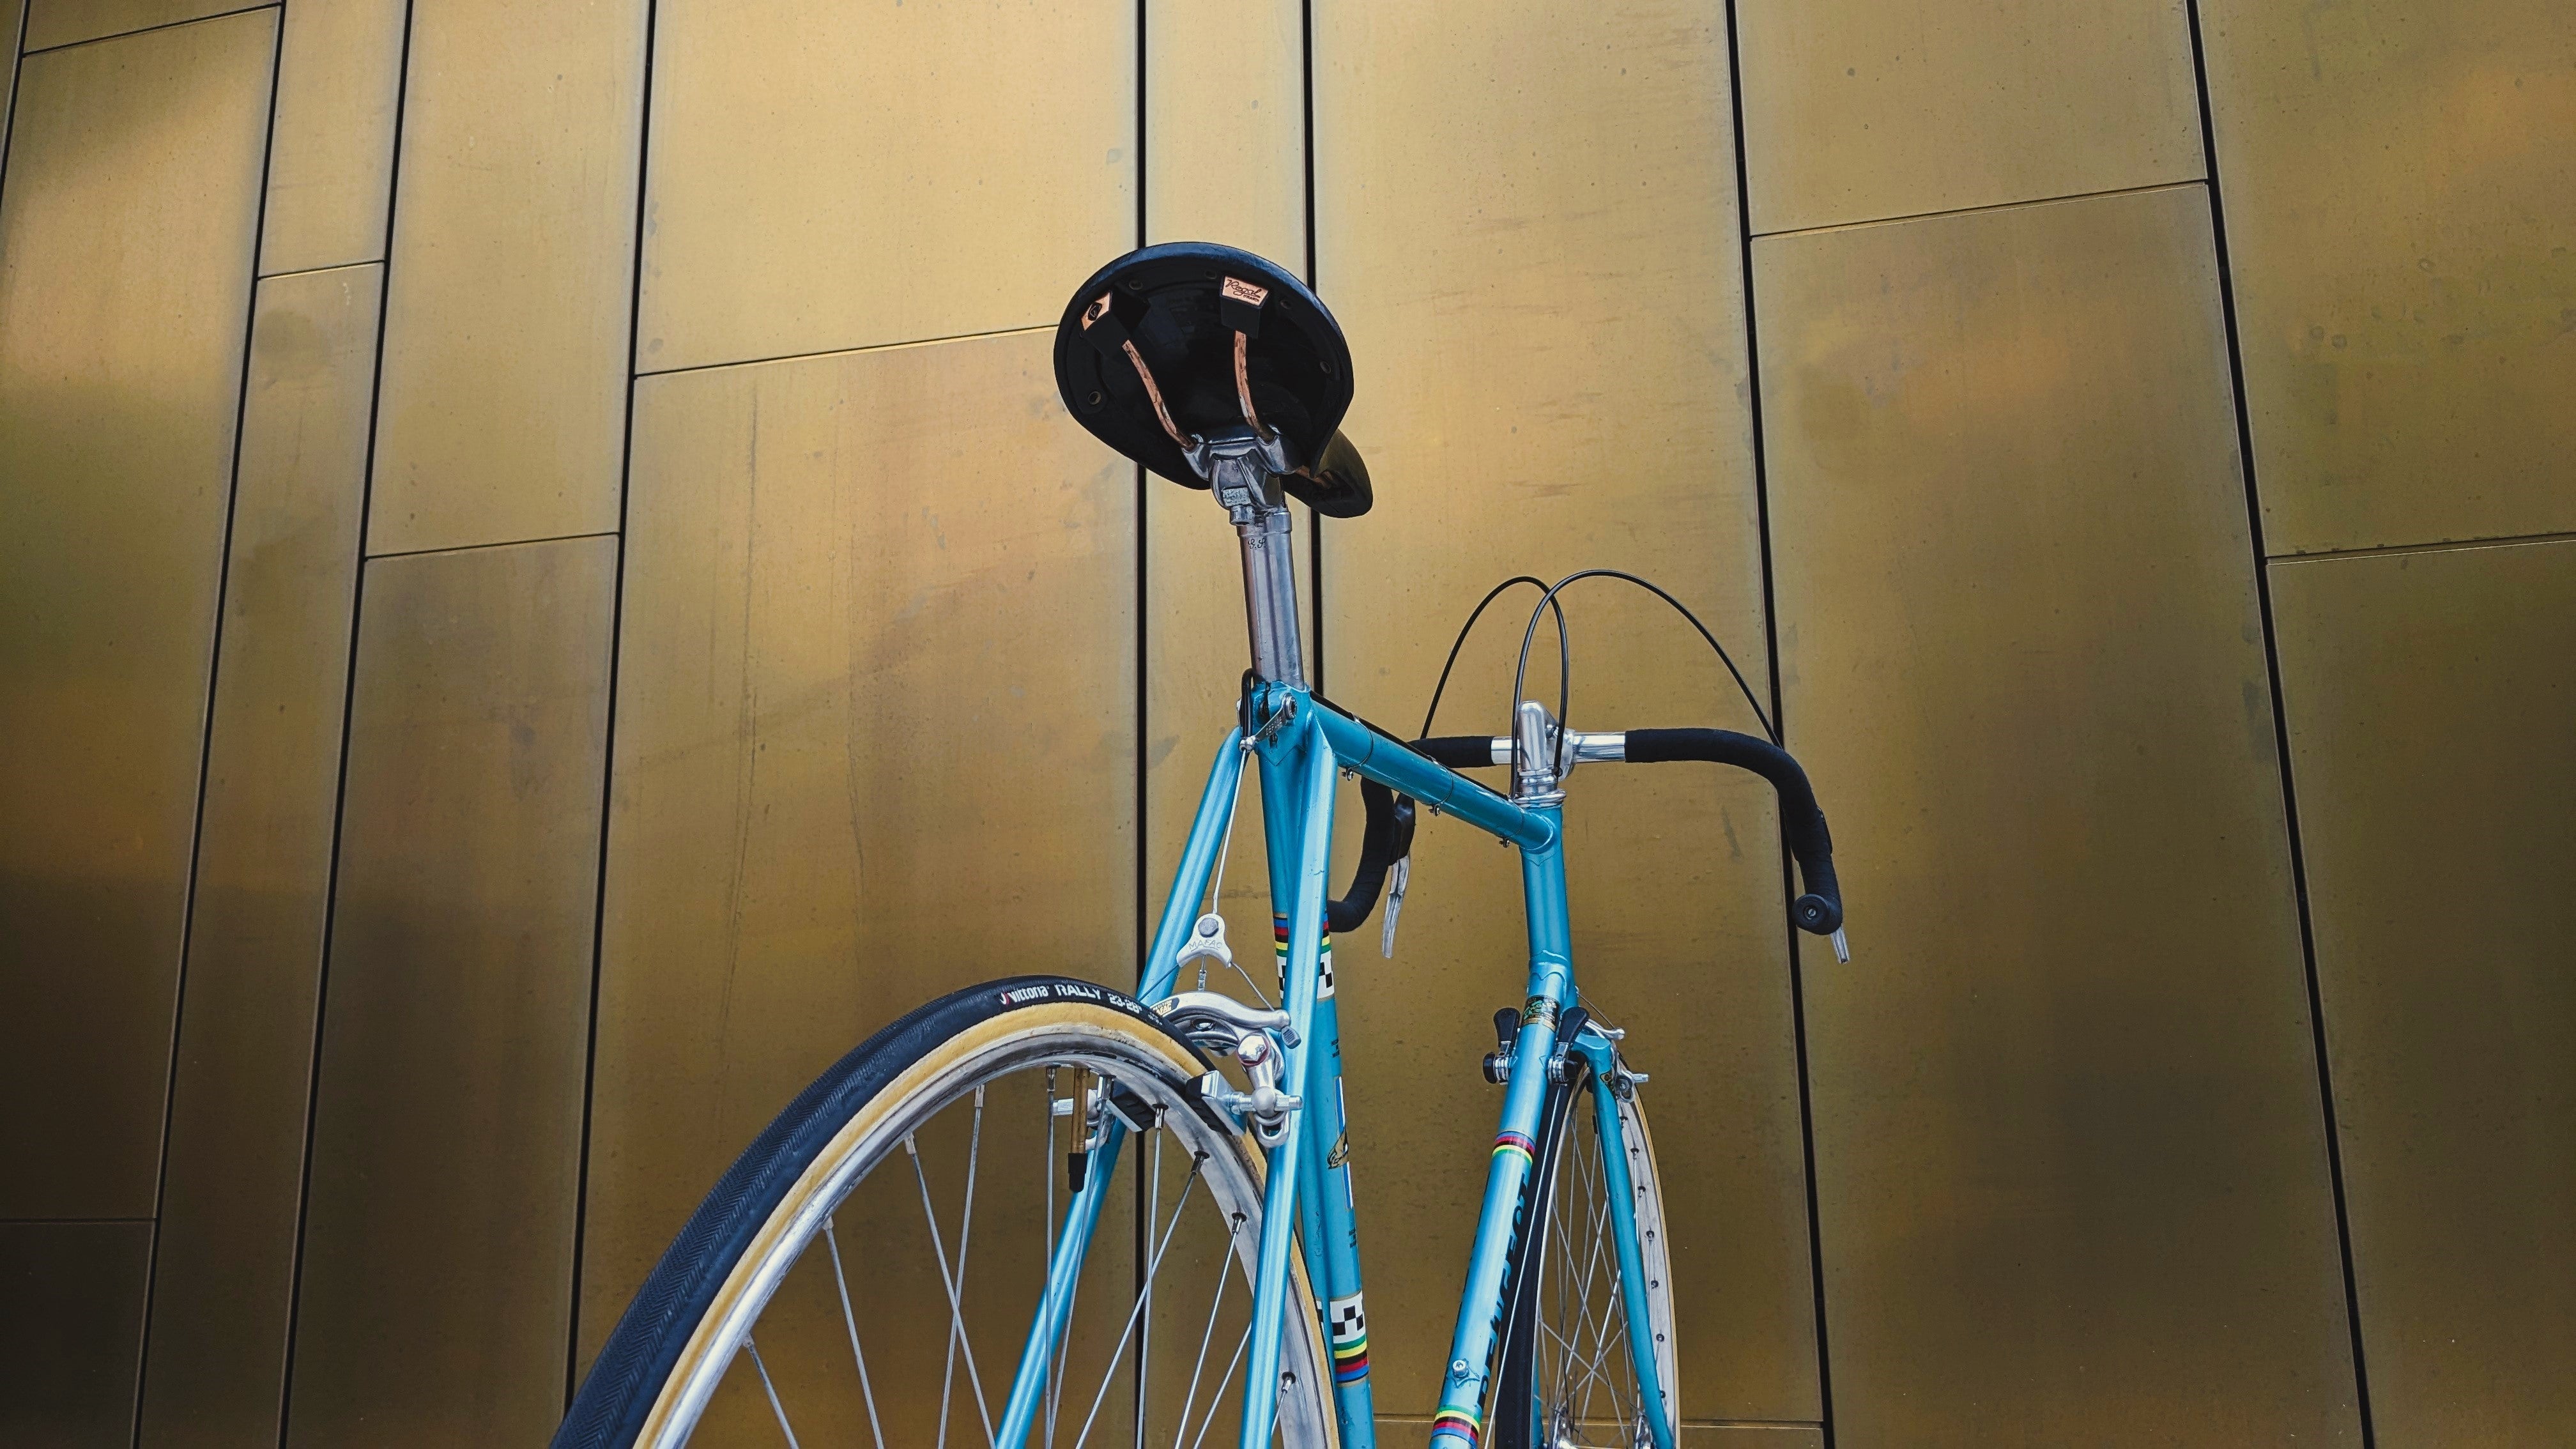 Professional Refurbished Blue Peugeot PX10 Retro Road Bicycle from 1977 standing in front of a golden Steel Wall.